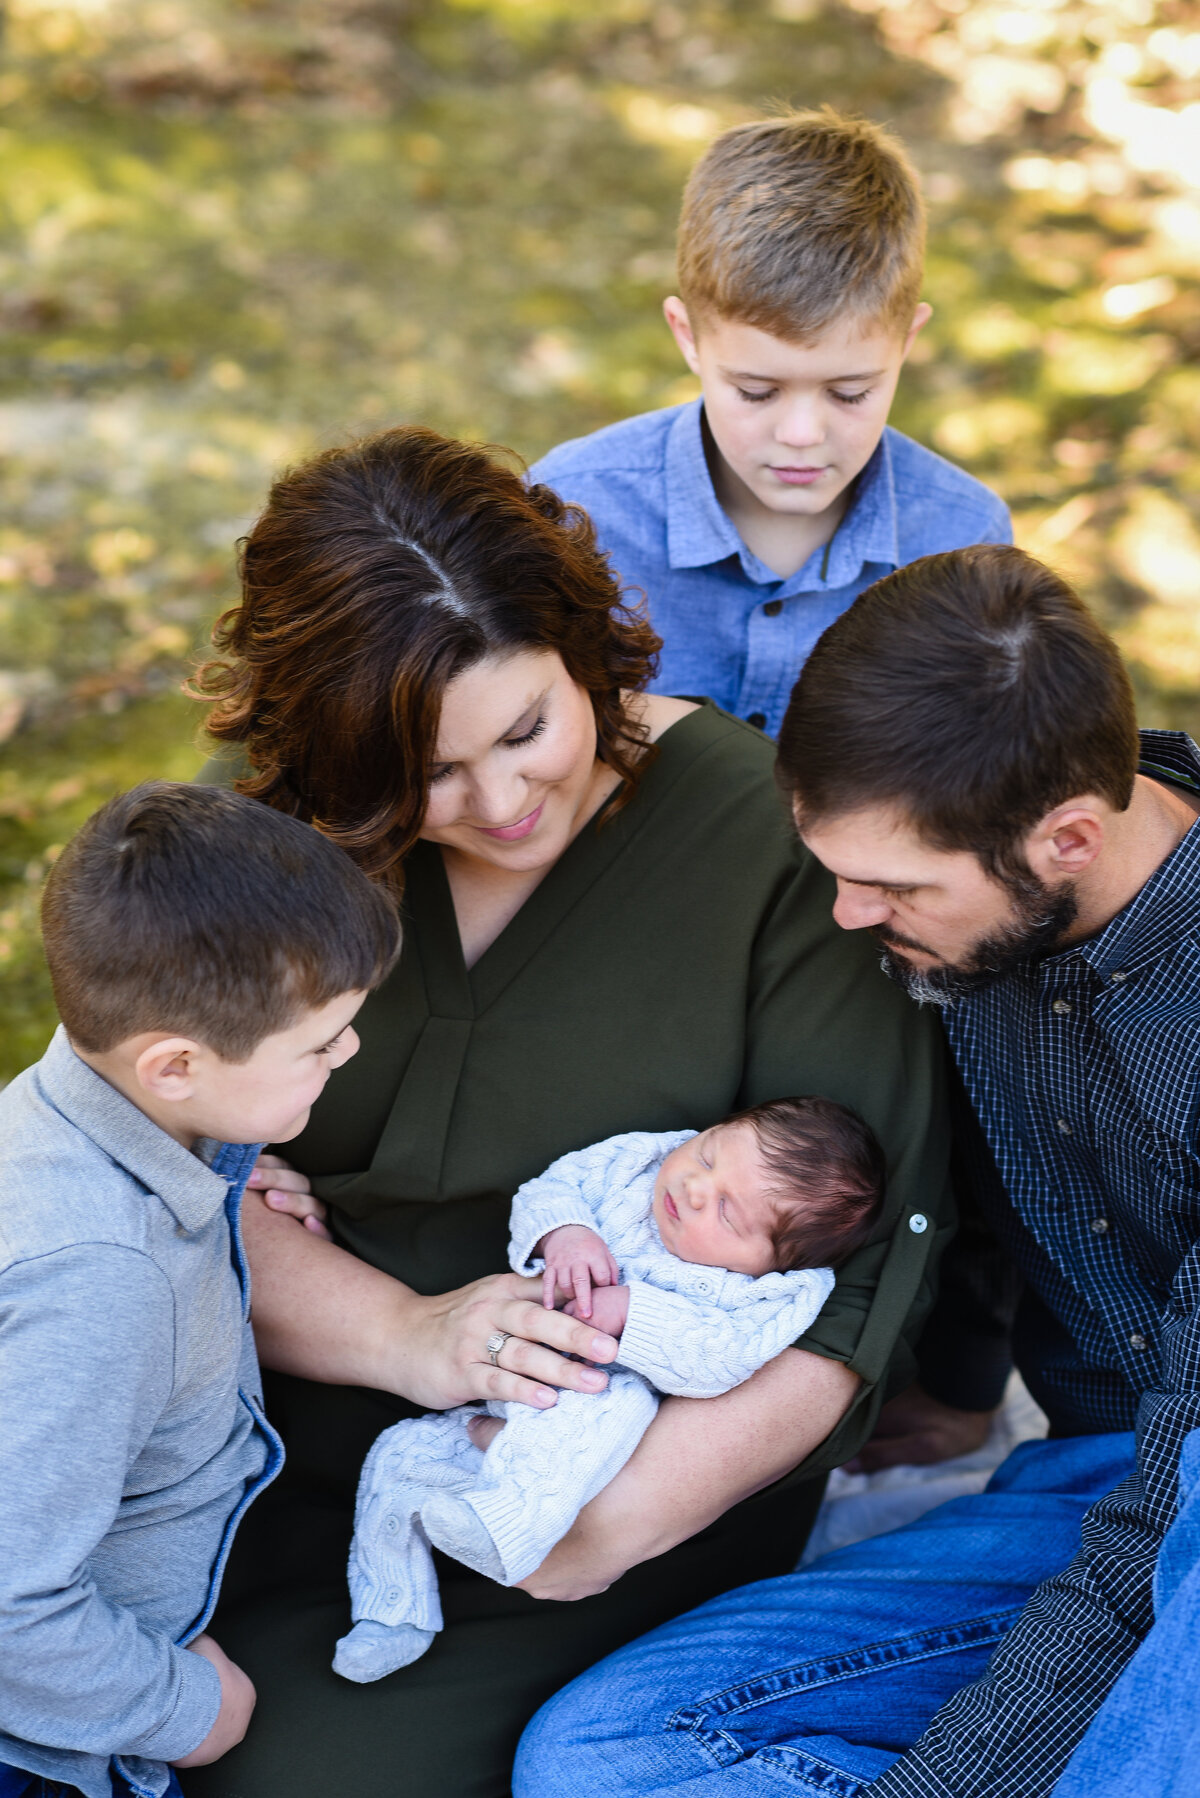 Beautiful Mississippi newborn photography: Family looks down at newborn baby outside under a tree in Mississippi